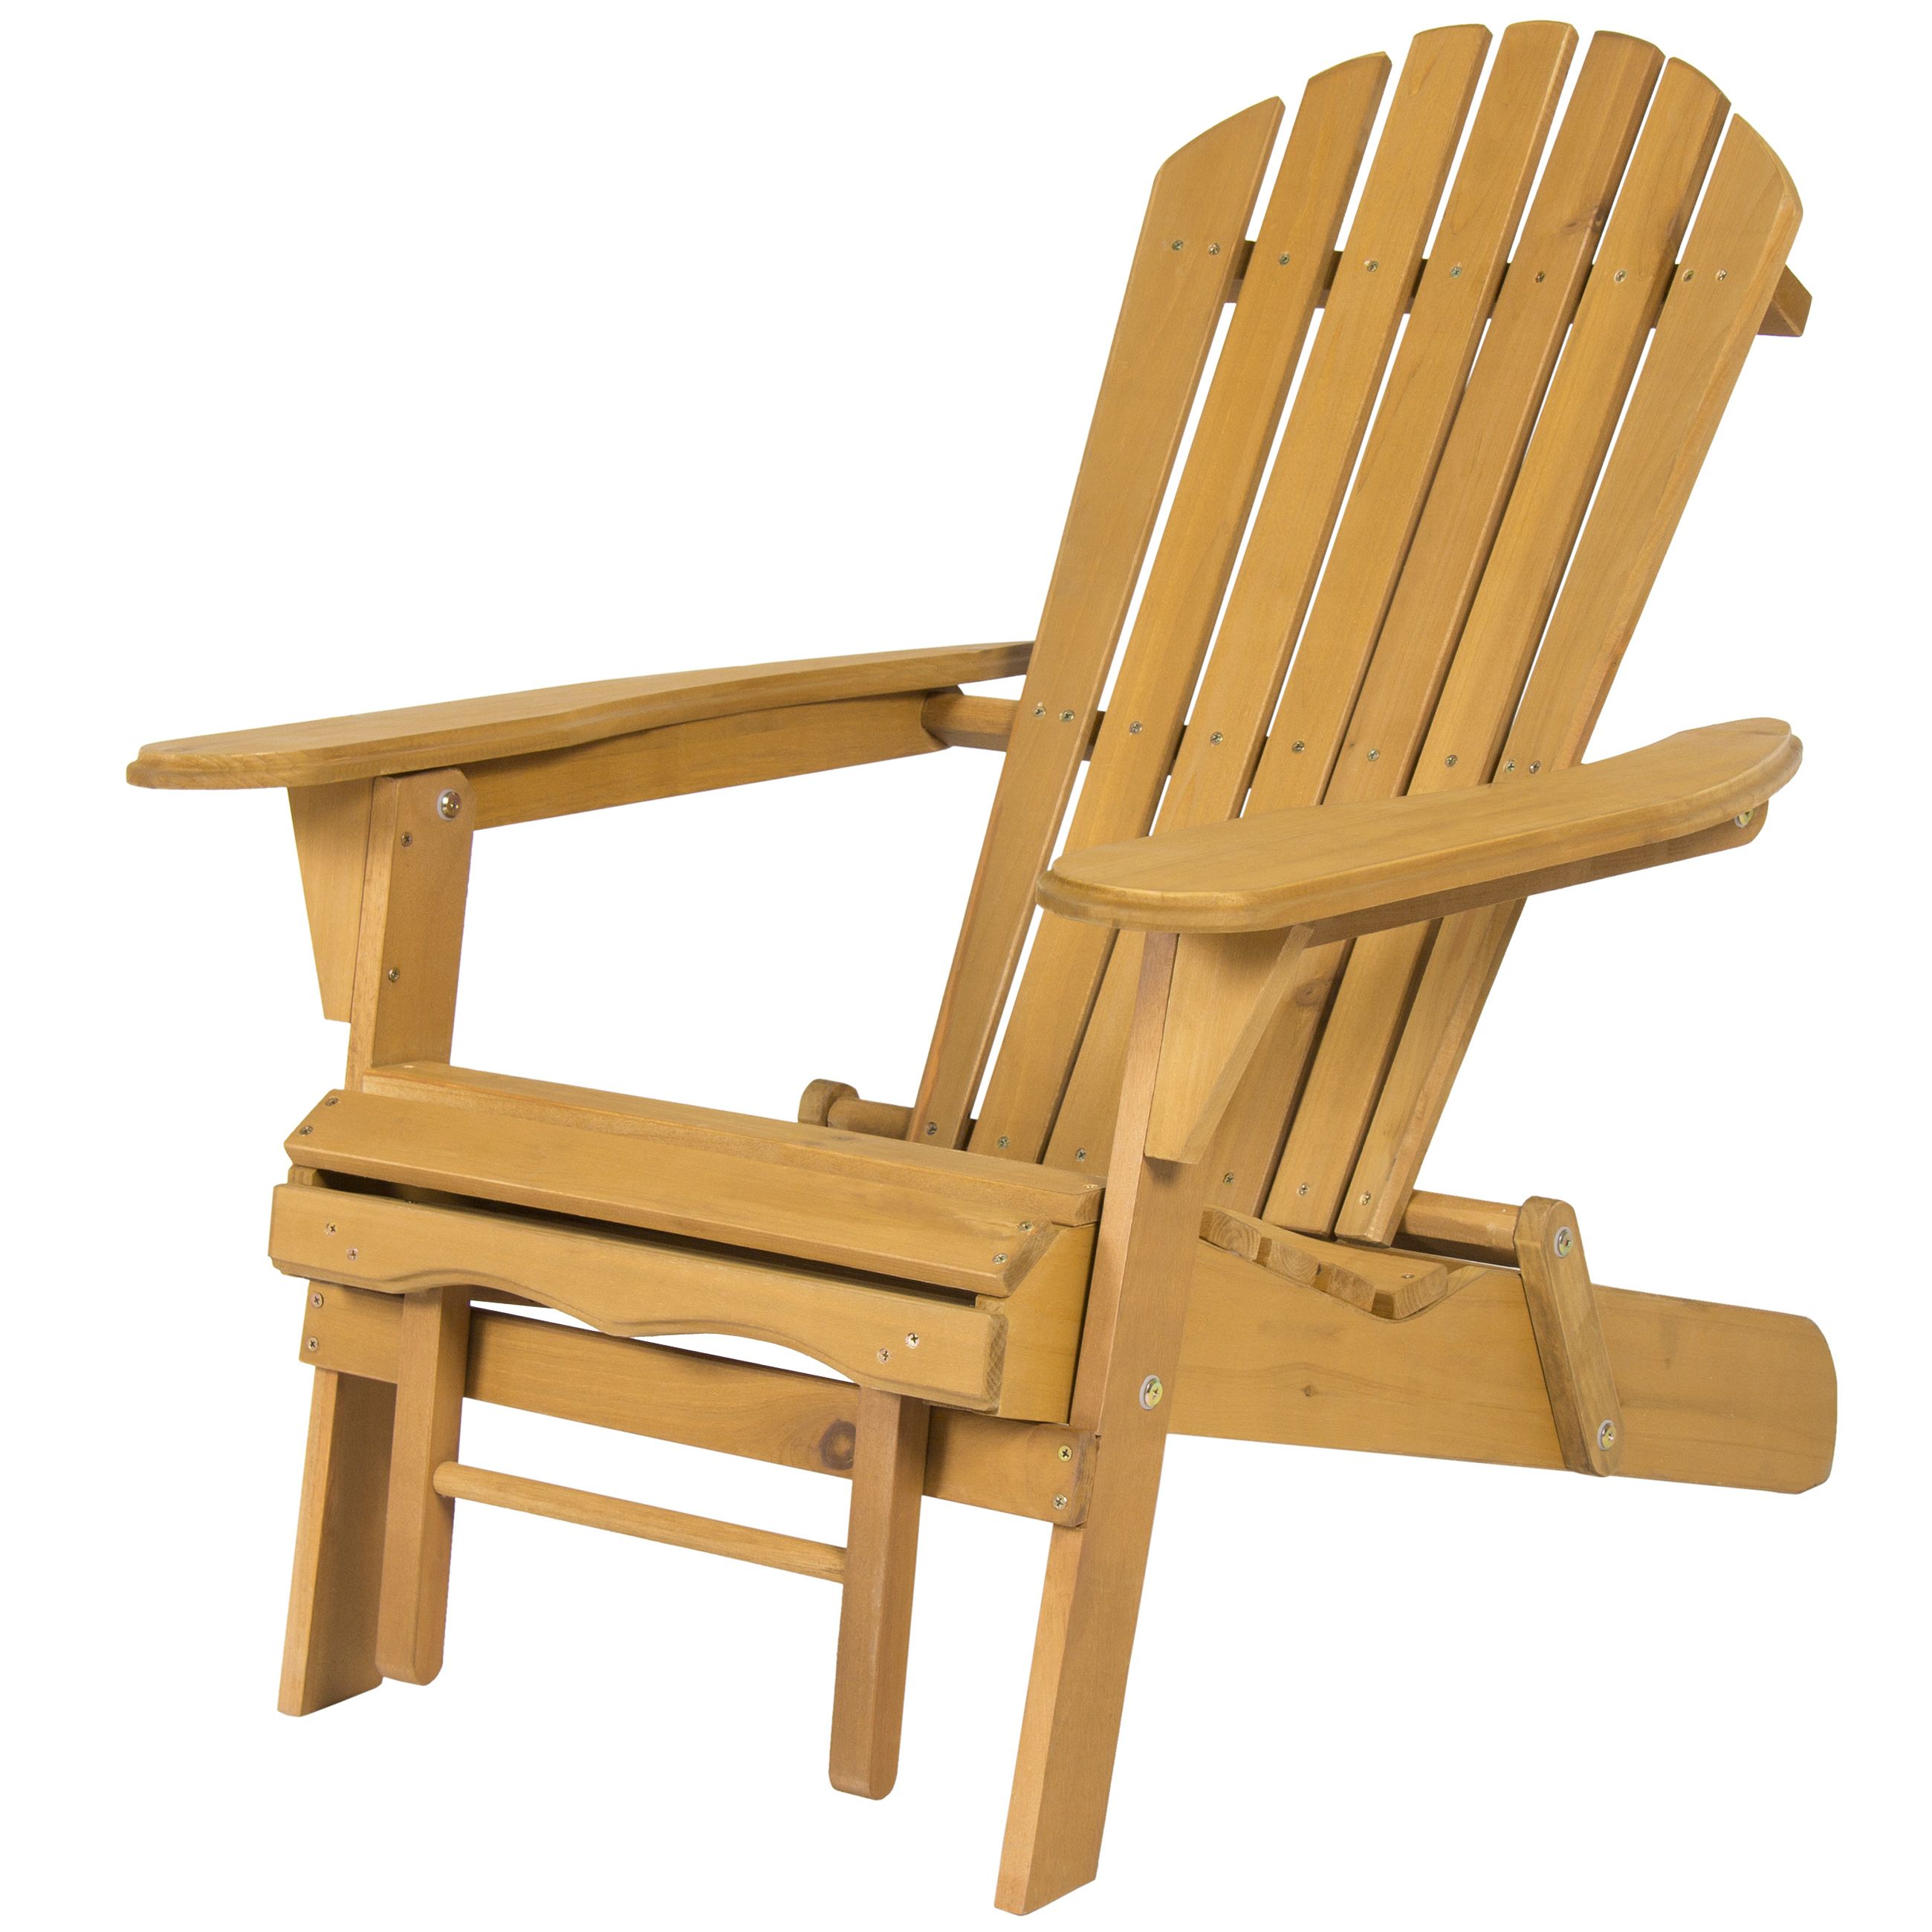 Handmade White Folding Adirondack Pull Out Footrest Chairs Pertaining To 2019 Best Choice Products Foldable Wood Adirondack Chair W/ Pull Out Ottoman (View 8 of 25)